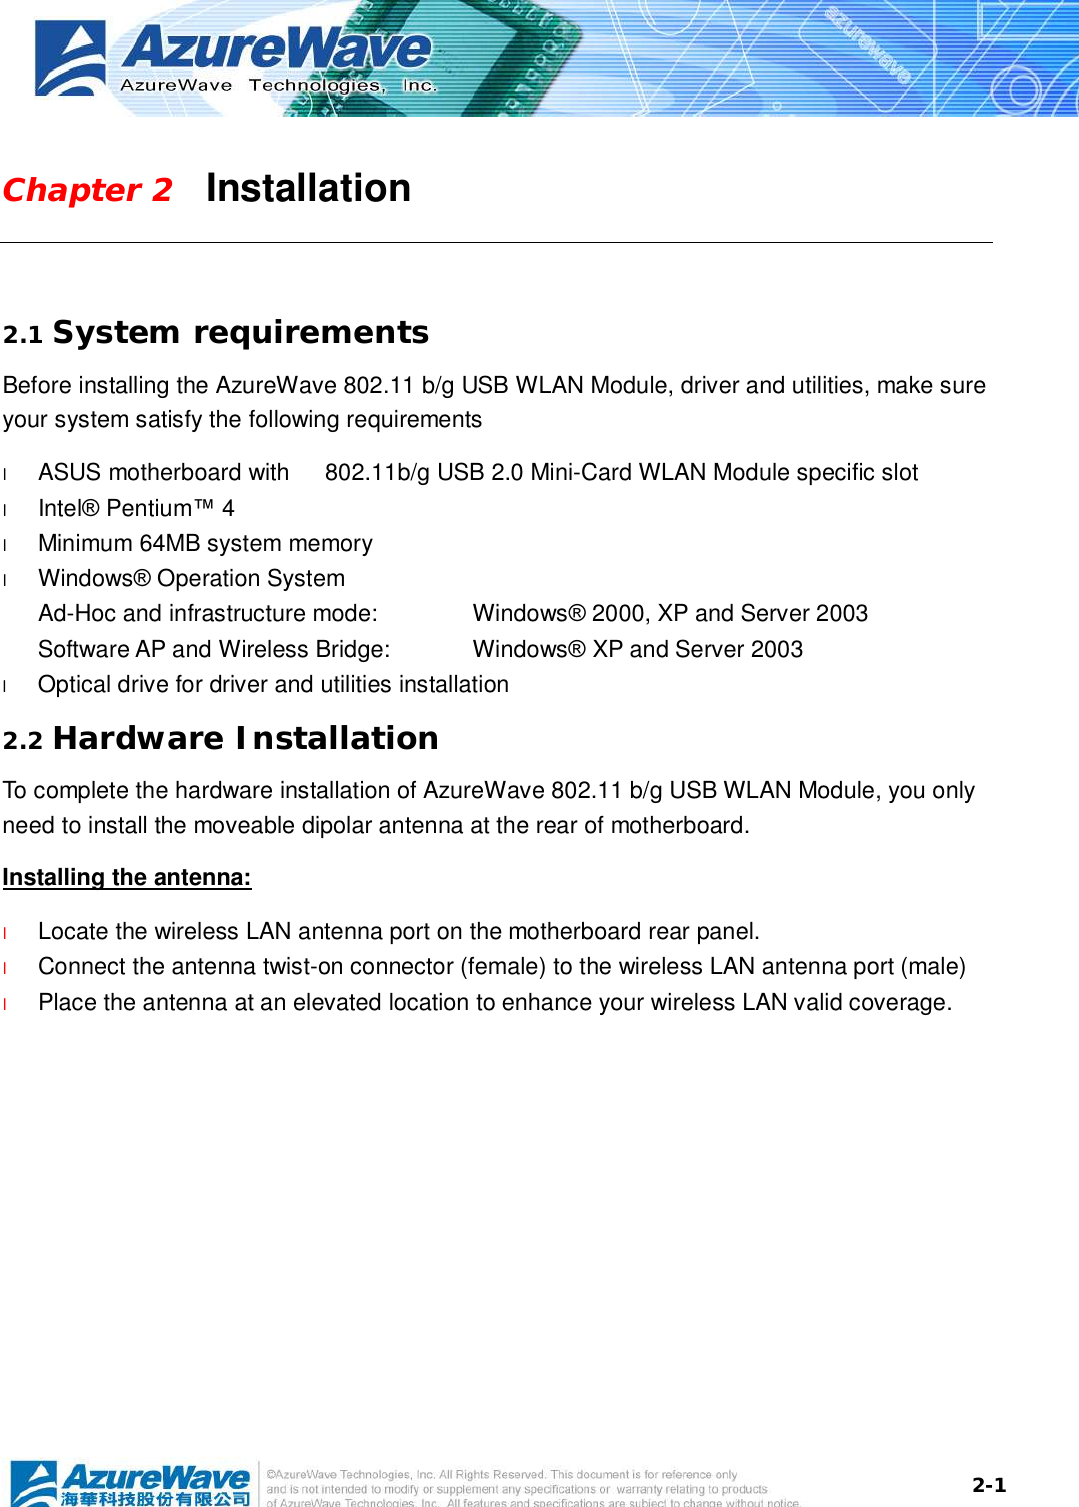  2-1Chapter 2   Installation  2.1 System requirements Before installing the AzureWave 802.11 b/g USB WLAN Module, driver and utilities, make sure your system satisfy the following requirements l  ASUS motherboard with   802.11b/g USB 2.0 Mini-Card WLAN Module specific slot l  Intel® Pentium™ 4 l  Minimum 64MB system memory l  Windows® Operation System Ad-Hoc and infrastructure mode:   Windows® 2000, XP and Server 2003 Software AP and Wireless Bridge:  Windows® XP and Server 2003 l  Optical drive for driver and utilities installation 2.2 Hardware Installation To complete the hardware installation of AzureWave 802.11 b/g USB WLAN Module, you only need to install the moveable dipolar antenna at the rear of motherboard. Installing the antenna: l  Locate the wireless LAN antenna port on the motherboard rear panel.  l  Connect the antenna twist-on connector (female) to the wireless LAN antenna port (male) l  Place the antenna at an elevated location to enhance your wireless LAN valid coverage.    